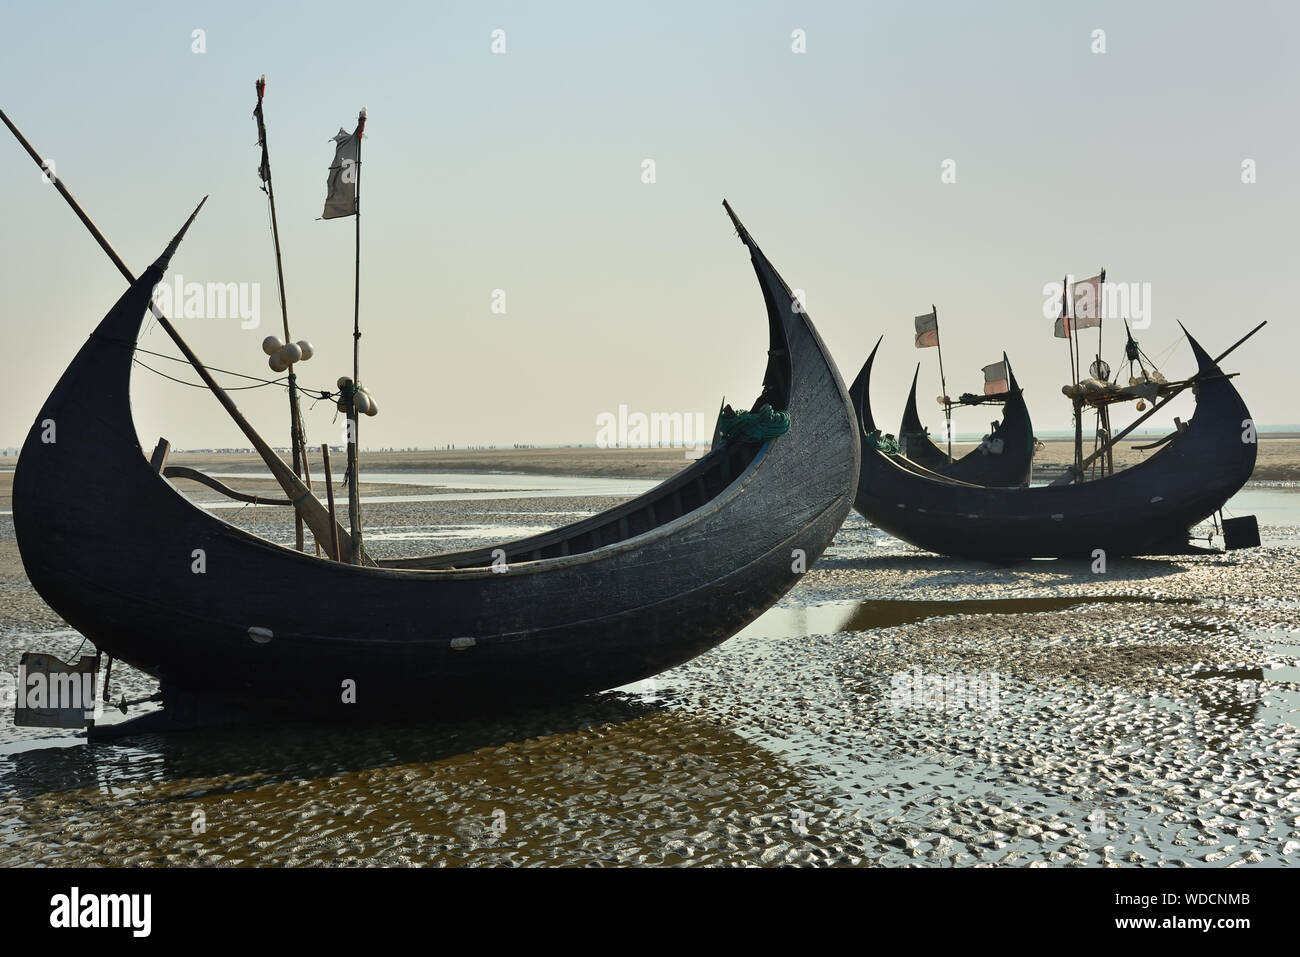 The traditional fishing boat (Sampan Boats) moored on the longest beach, Cox's Bazar in Bangladesh. Stock Photo